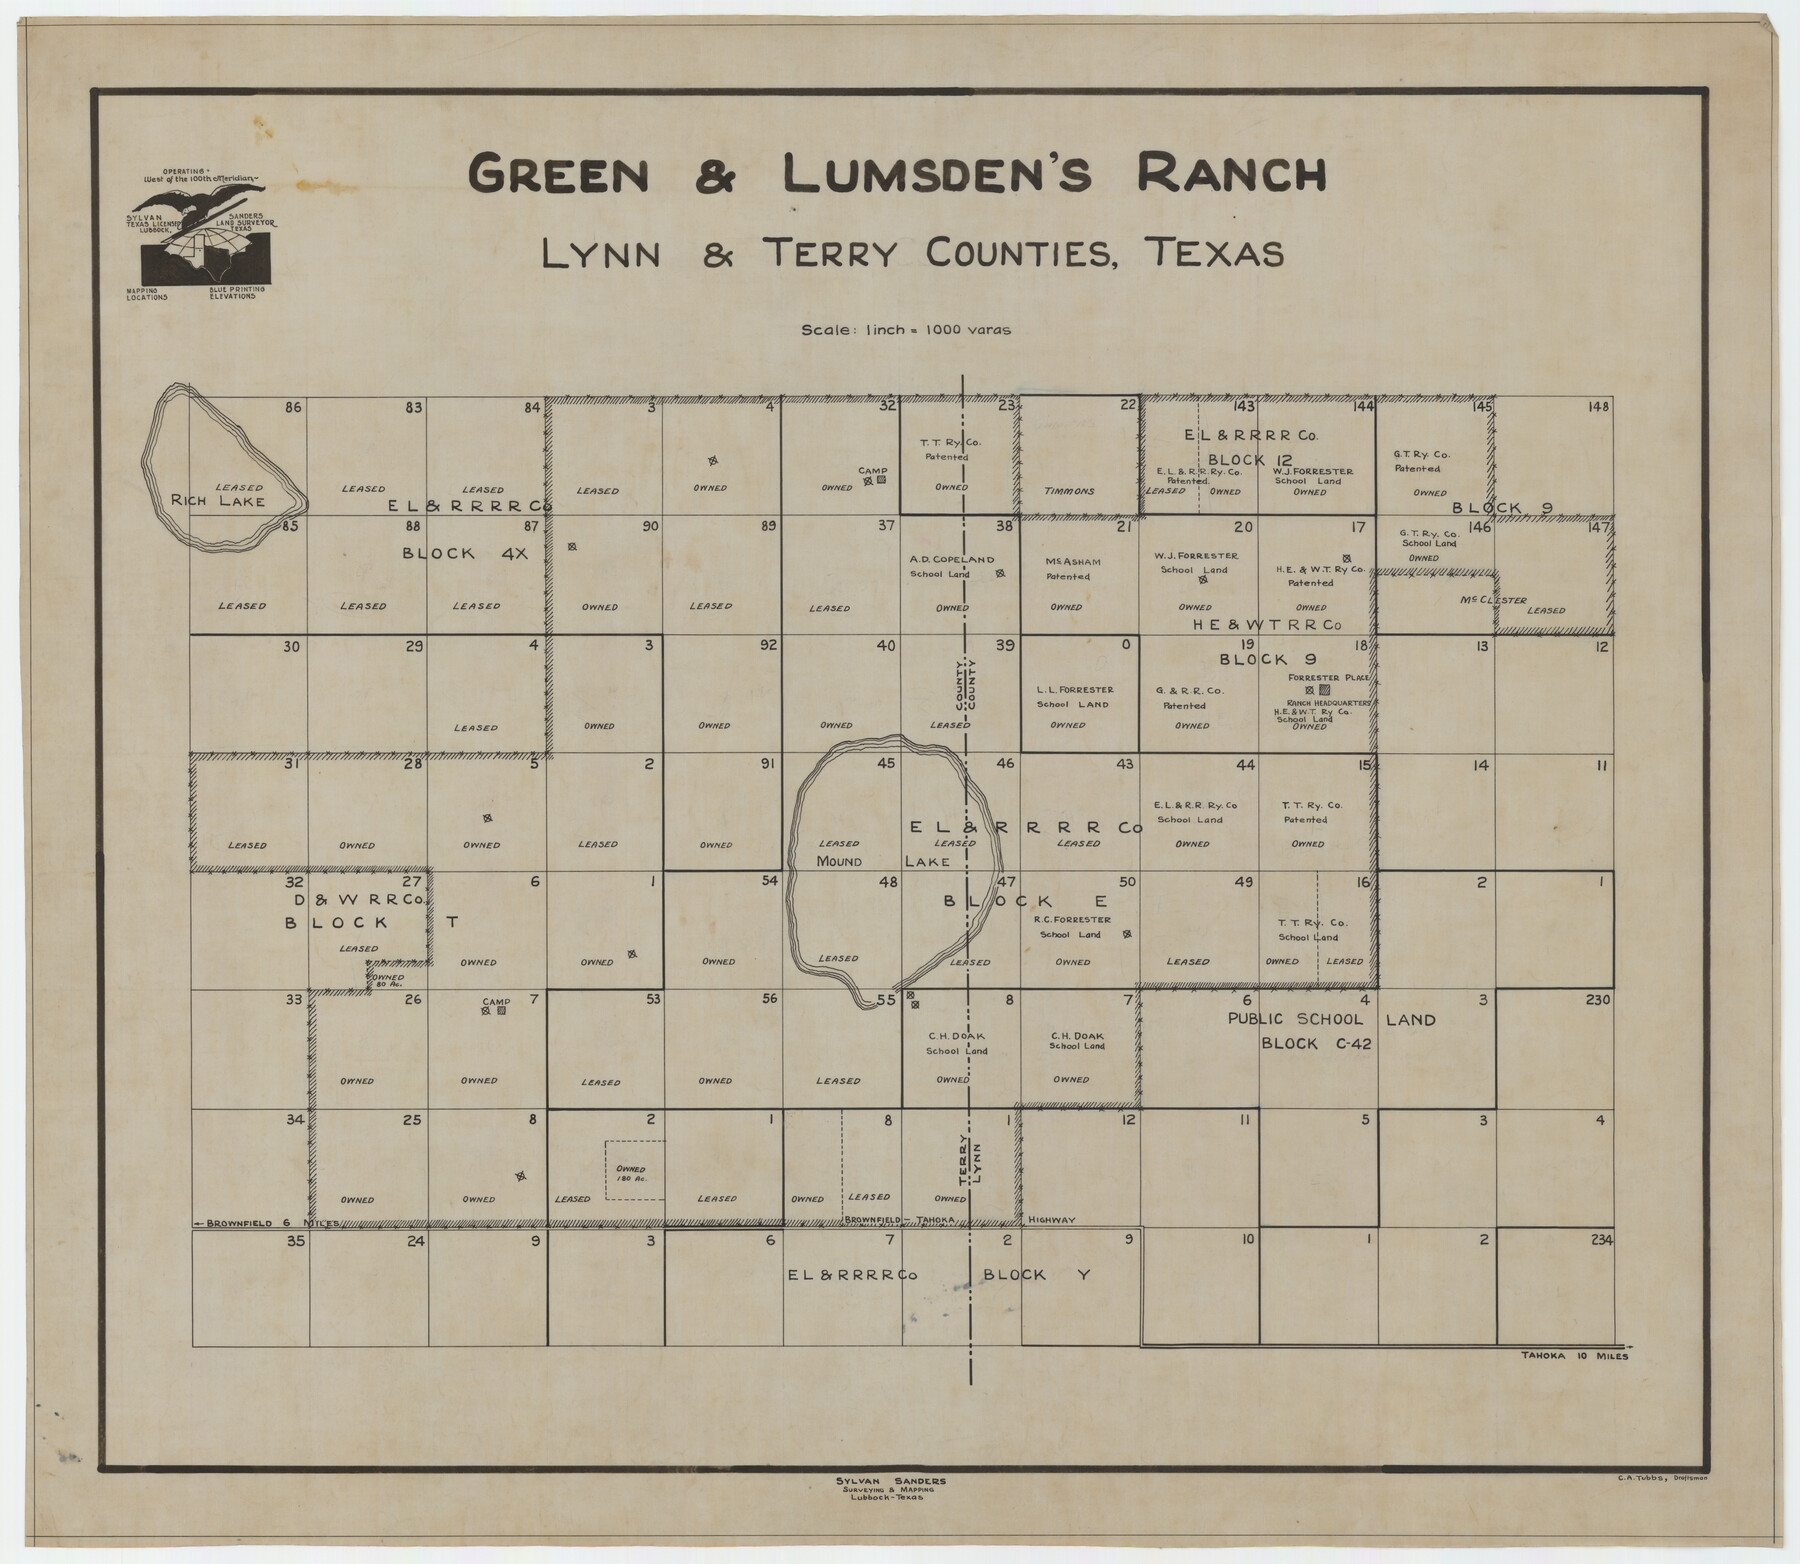 92946, Green & Lumsden's Ranch, Twichell Survey Records